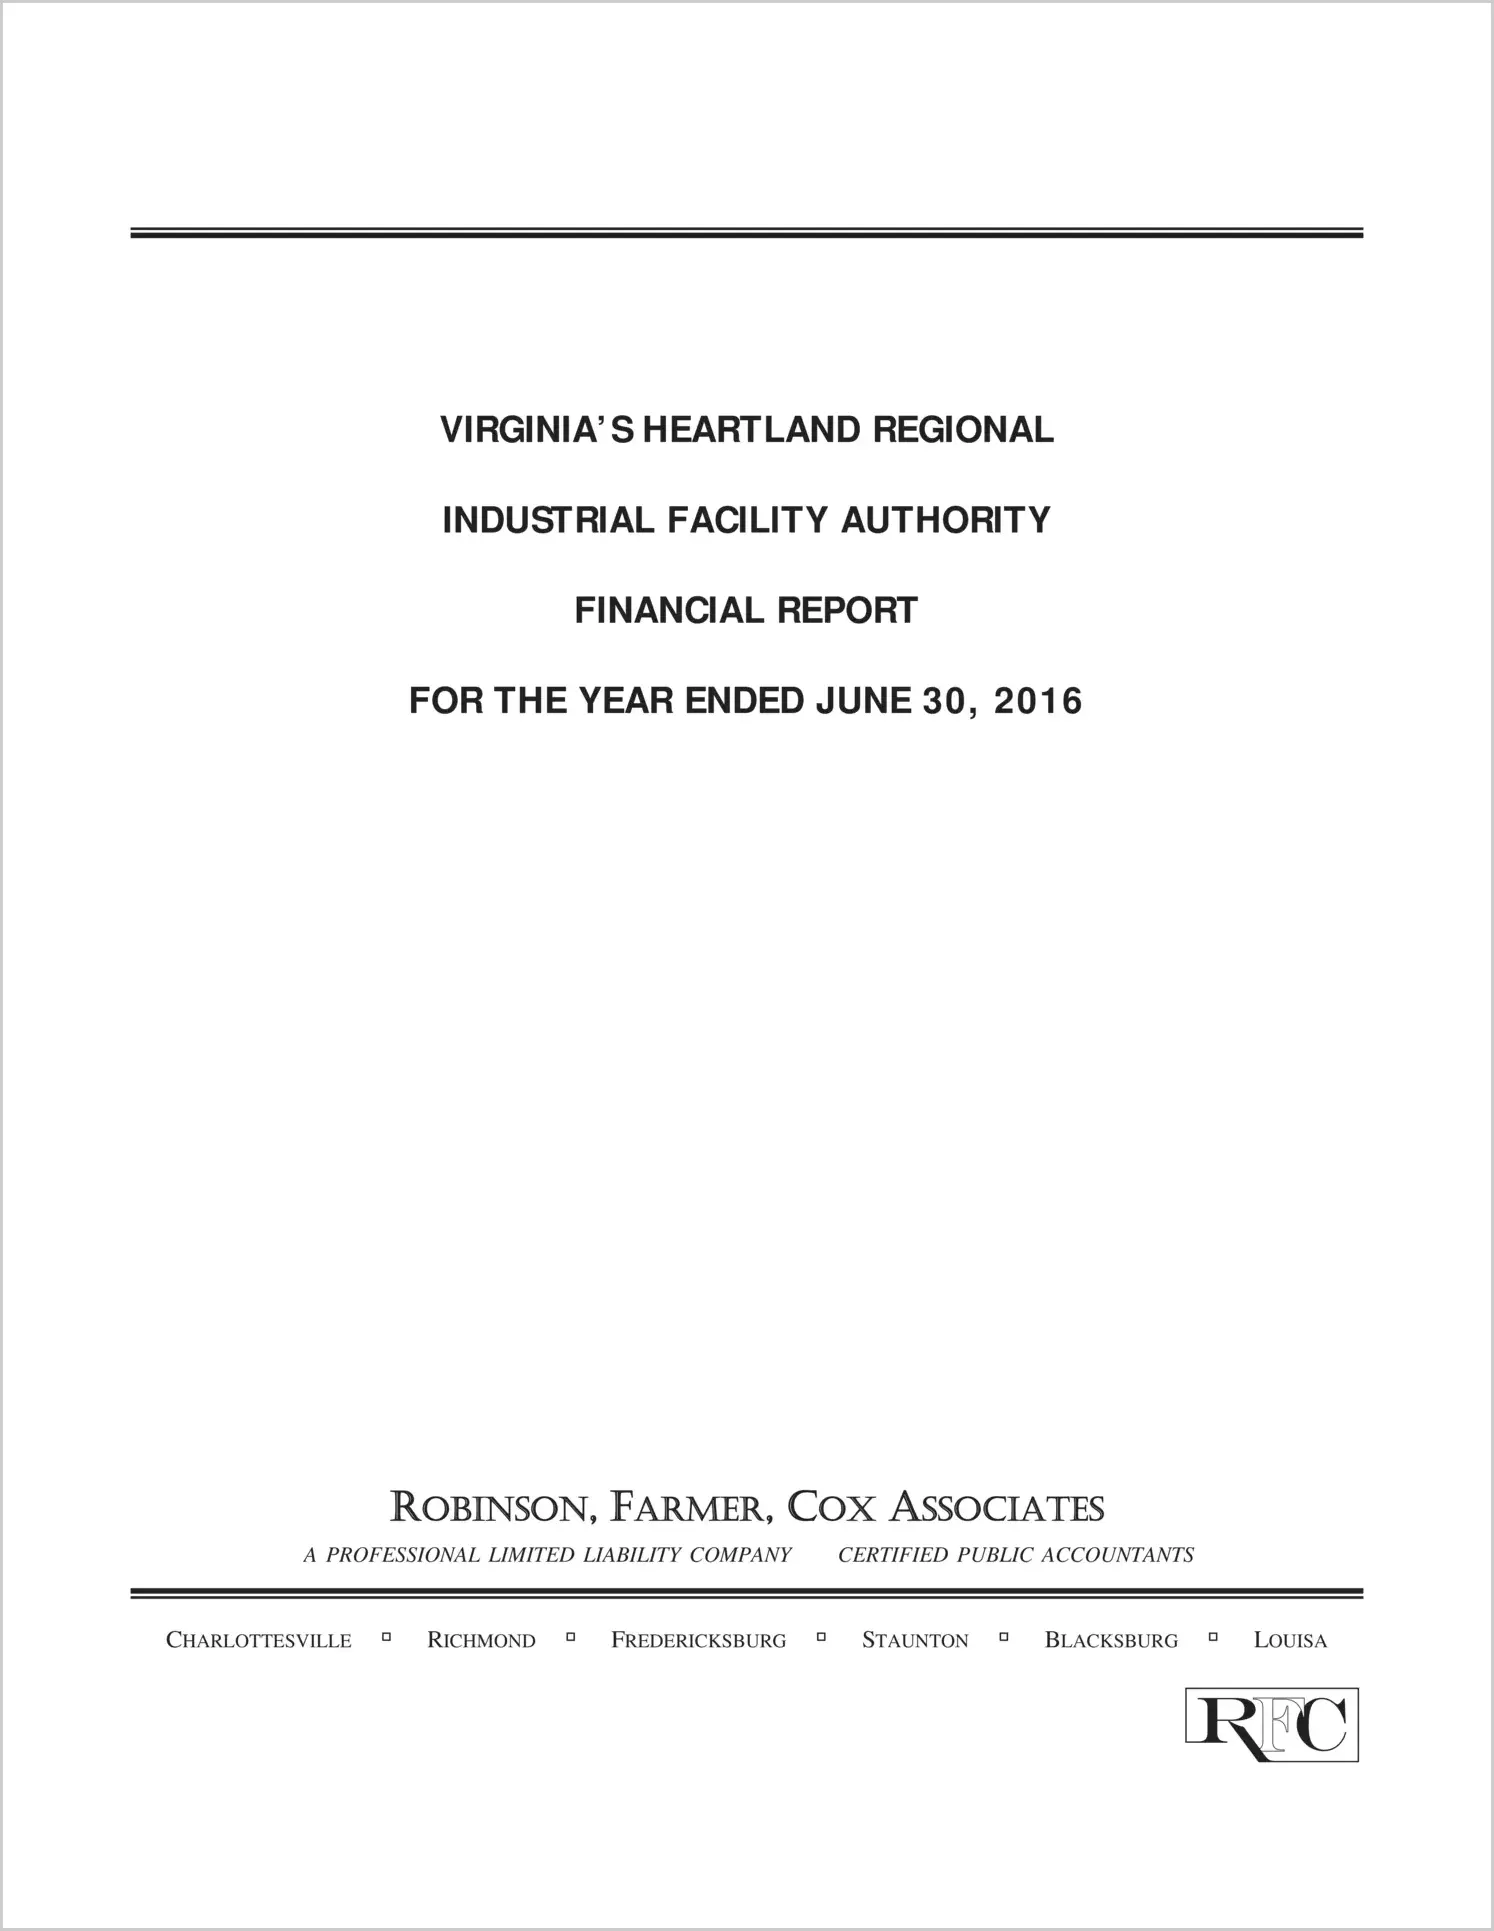 2016 Other Annual Financial Report for Virginia Heartland Regional Industrial Facility Authority